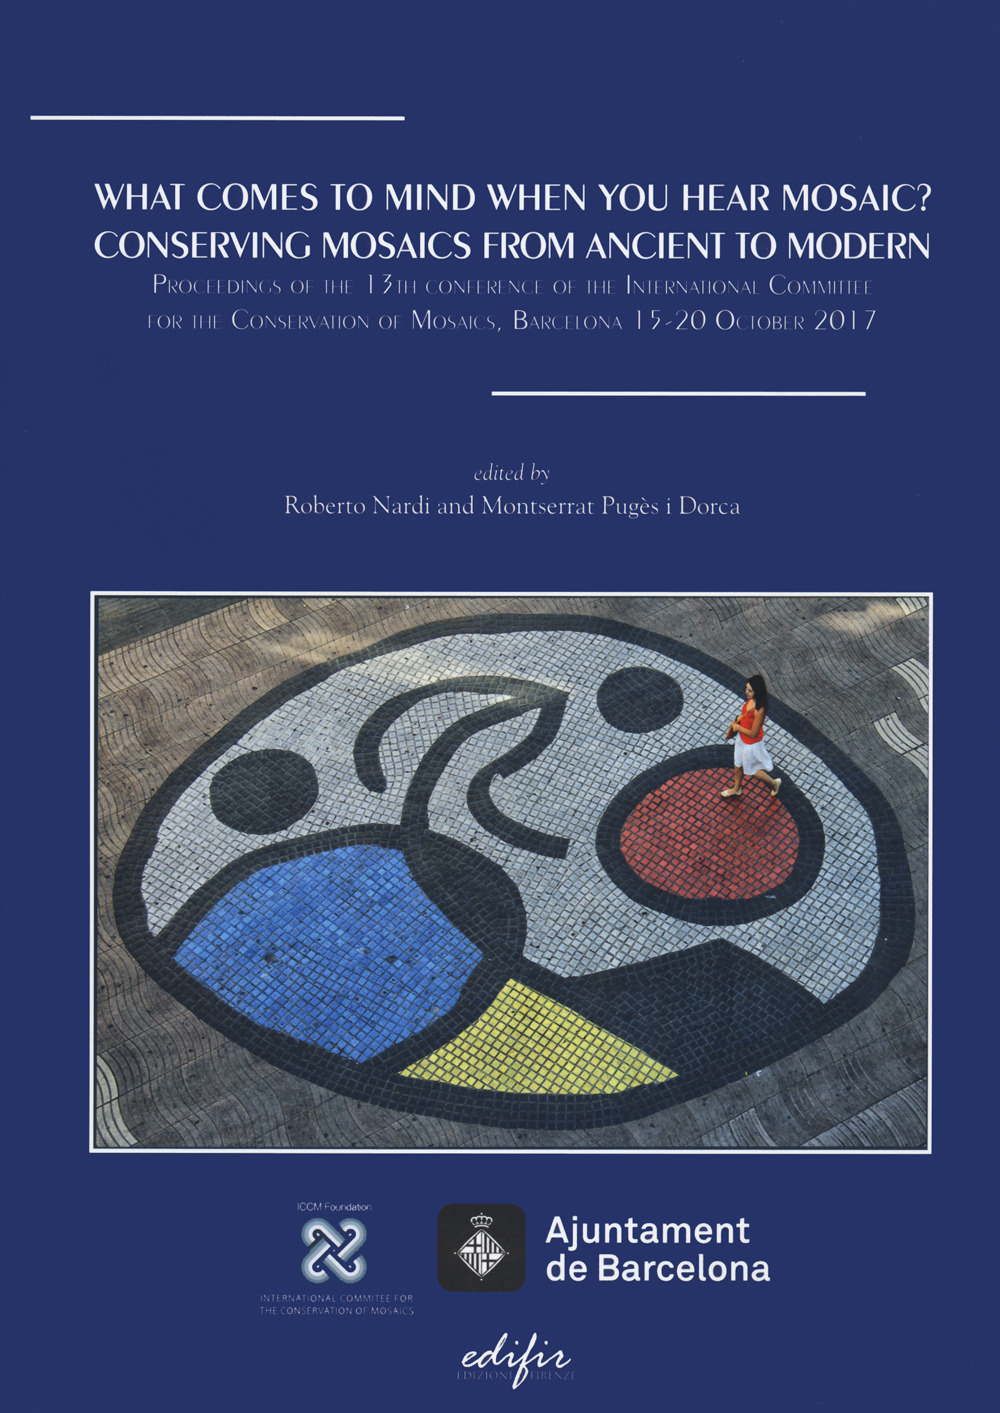 Libri What Comes To Mind When You Hear Mosaic? Conserving Mosaics From Ancient To Modern. Proceedings Of The 13Th Conference Of The International Committee NUOVO SIGILLATO, EDIZIONE DEL 10/12/2021 SUBITO DISPONIBILE